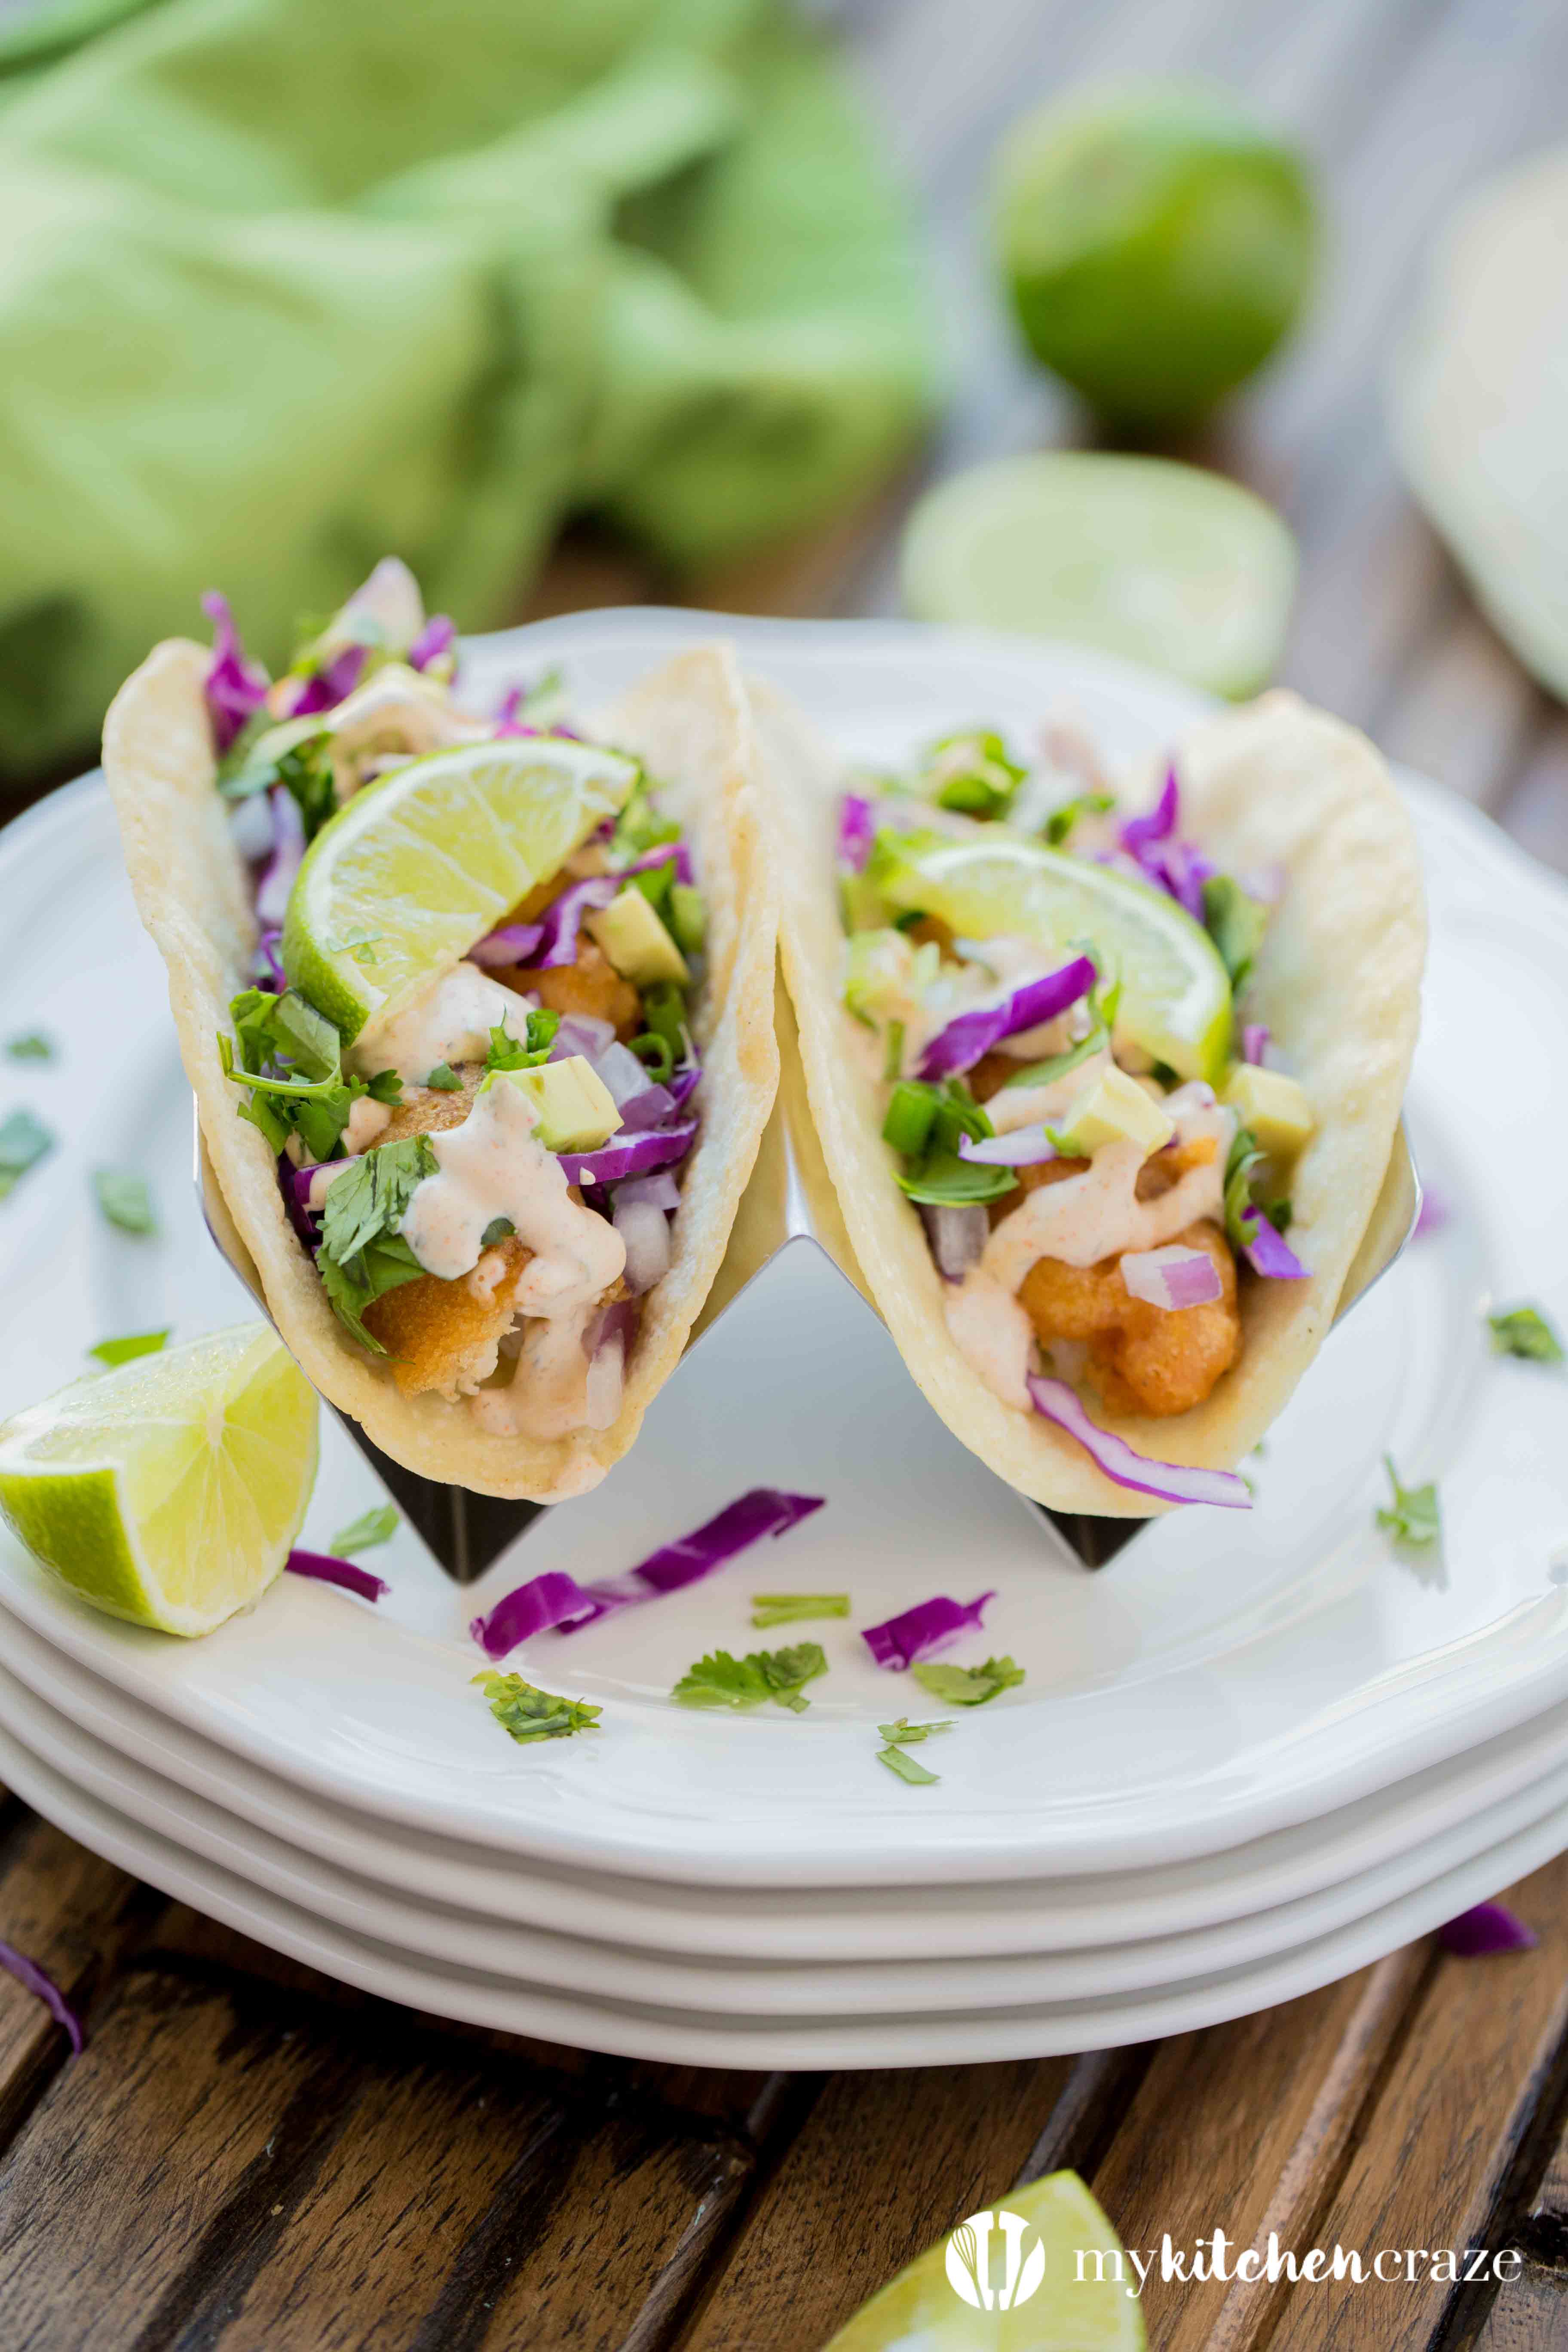 Do you love fish tacos, but have to go out to enjoy them? Well not anymore. These Beer Battered Fish Tacos are not only delicious, but easy to make in the comfort of your own home. Let me show you!